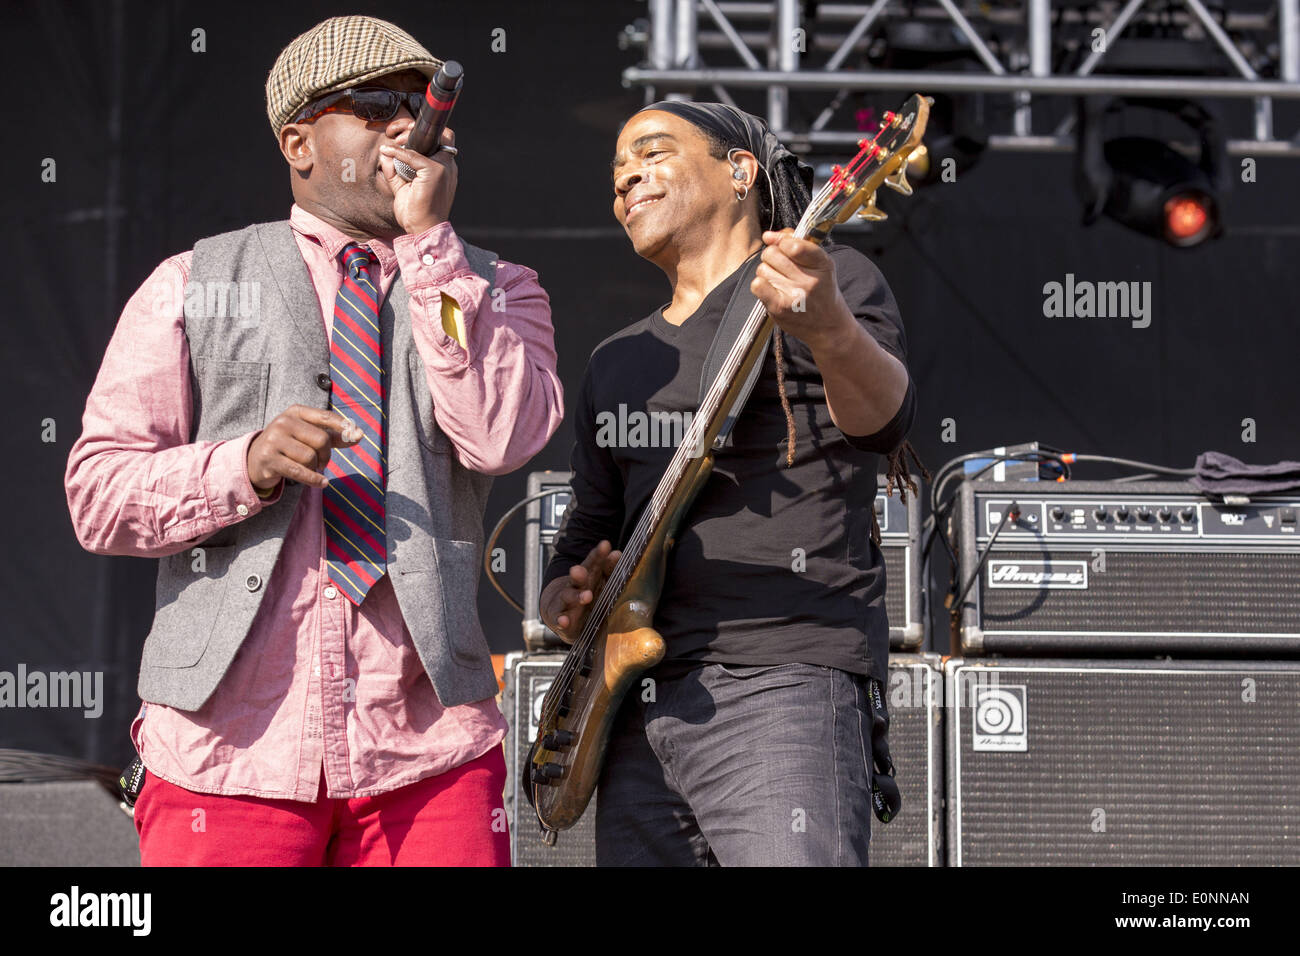 Columbus, Ohio, USA. 16th May, 2014. Vocalist COREY GLOVER and DOUG WIMBISH of Living Colour perform live at Rock on the Range music festival in Columbus, Ohio Credit:  Daniel DeSlover/ZUMAPRESS.com/Alamy Live News Stock Photo